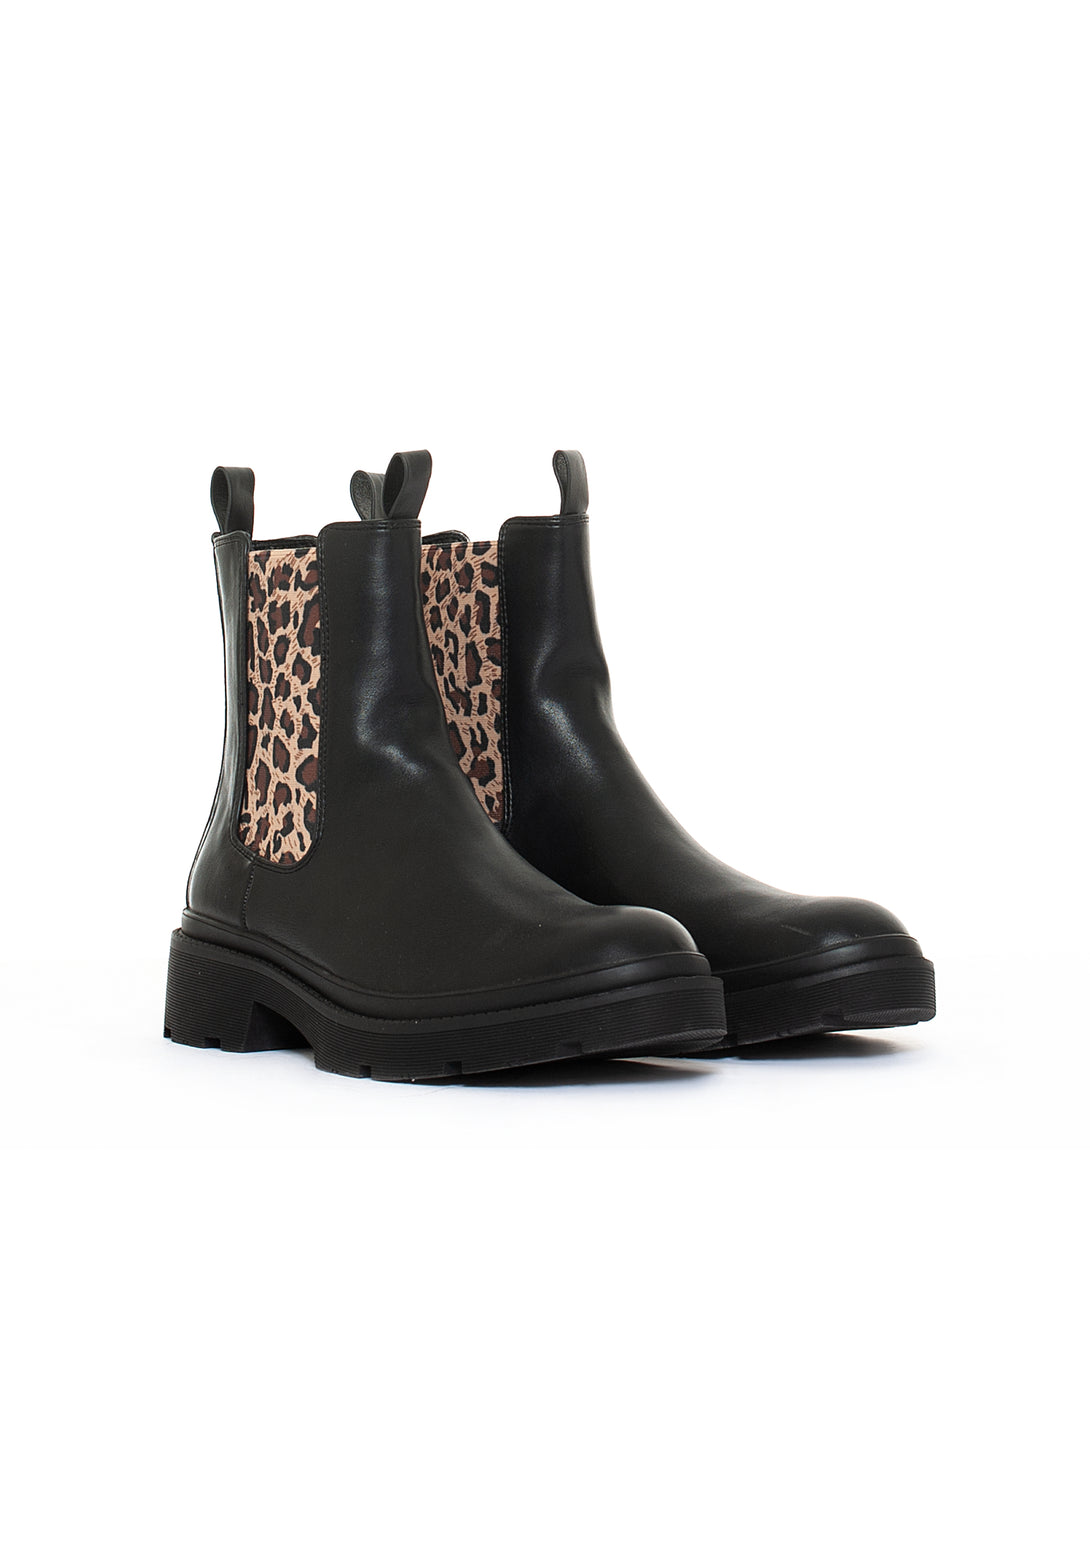 Chelsea boots made in eco leather with animalier details